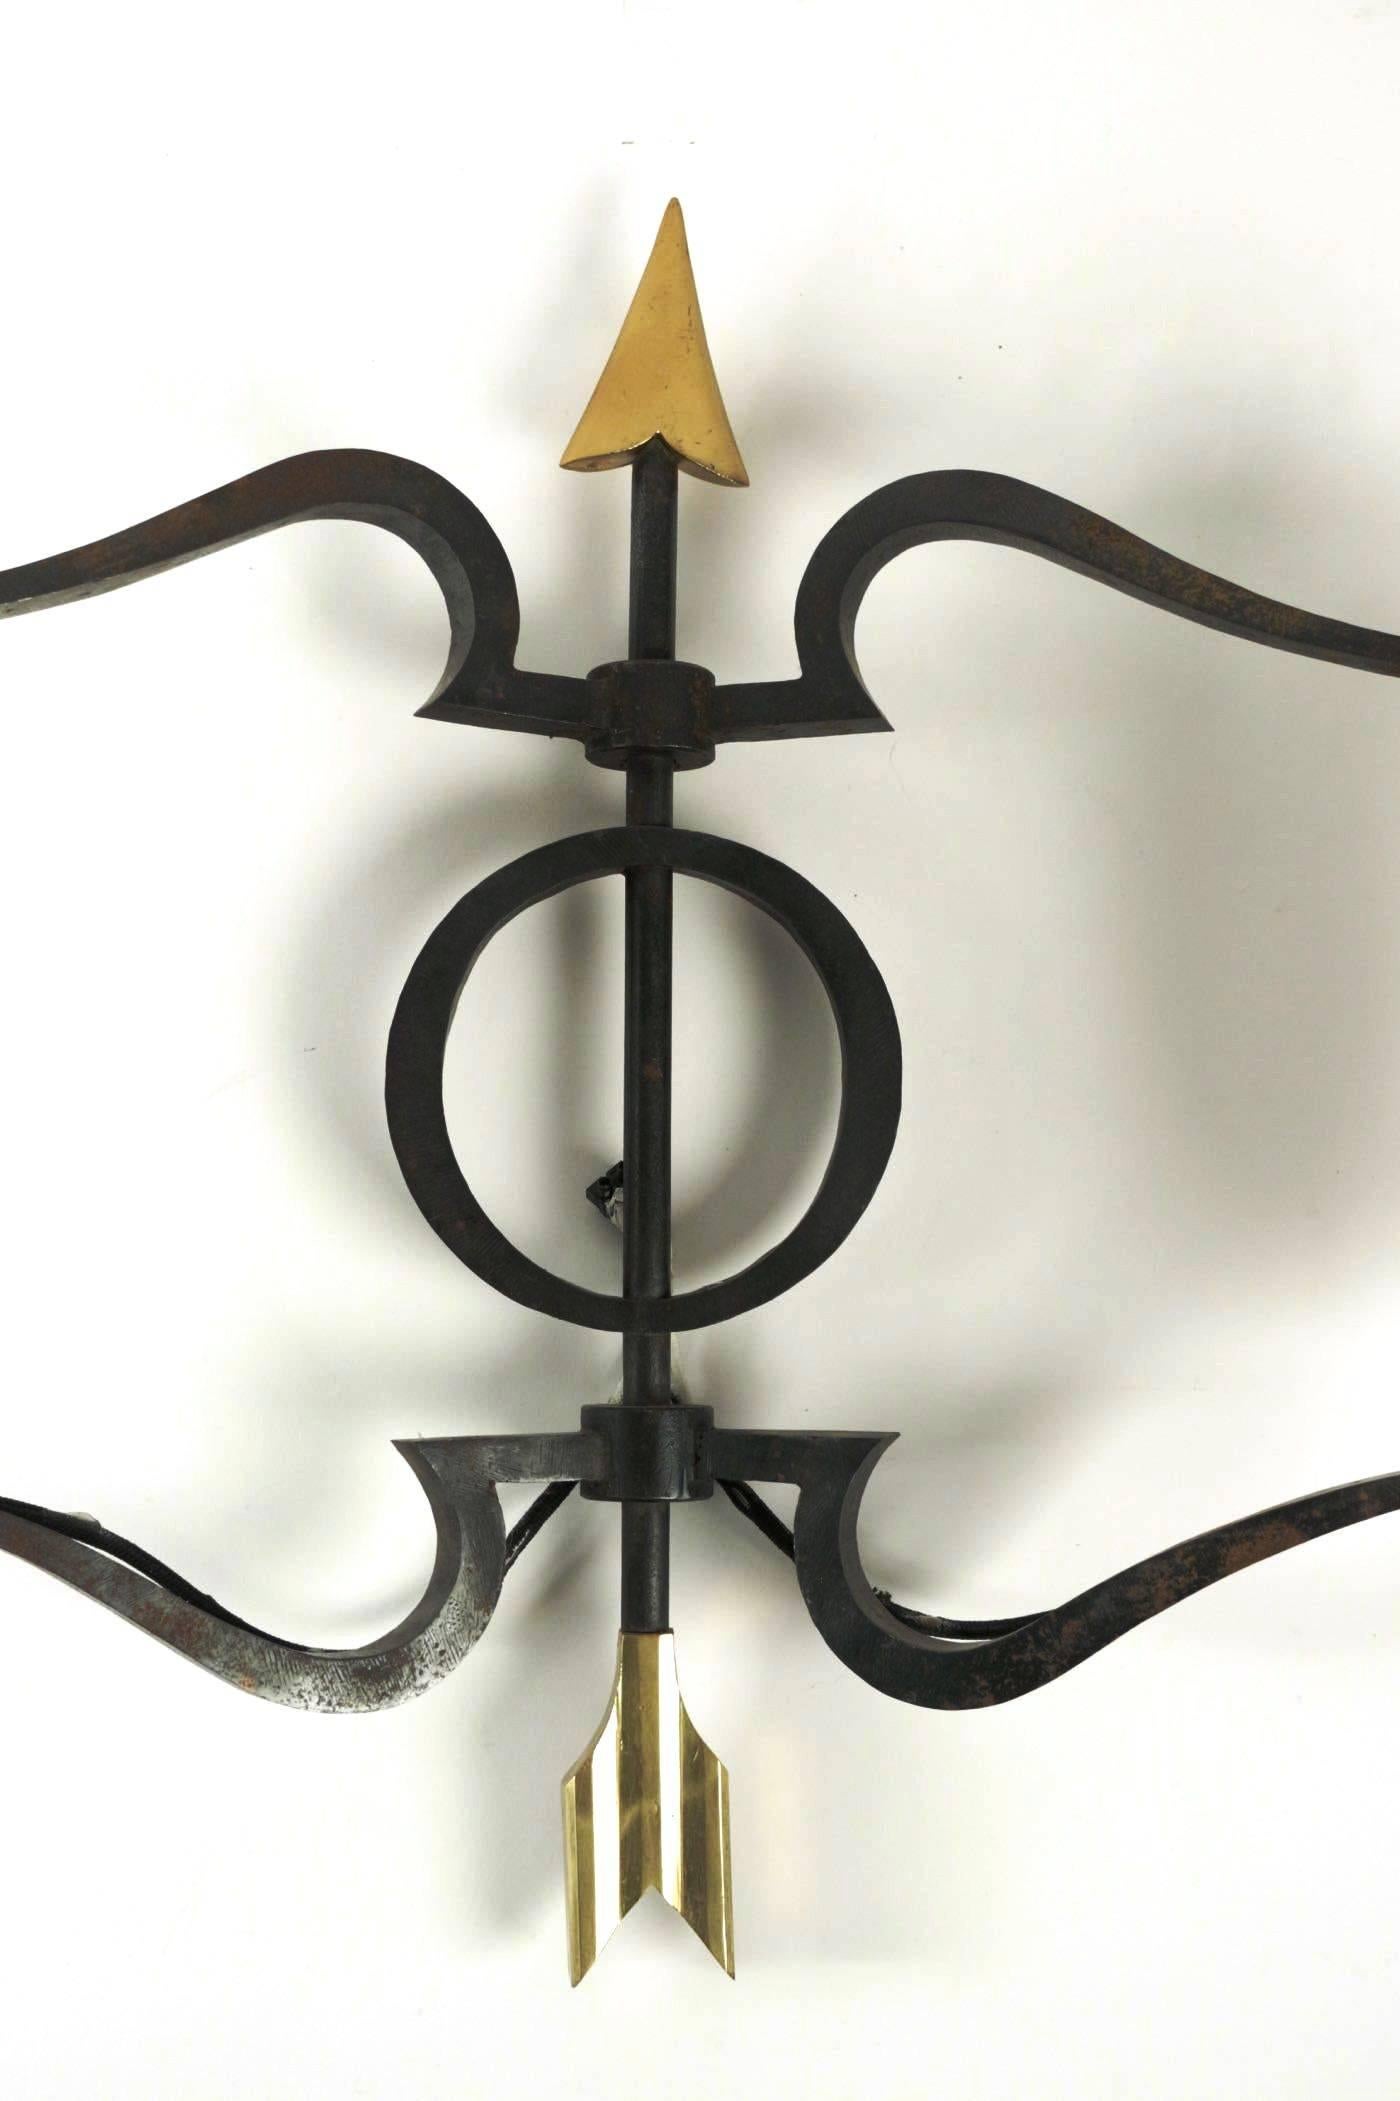 Spectacular Pair of Bronze Wall Lights by Jacques Tournus, France, 1940s (Mitte des 20. Jahrhunderts)